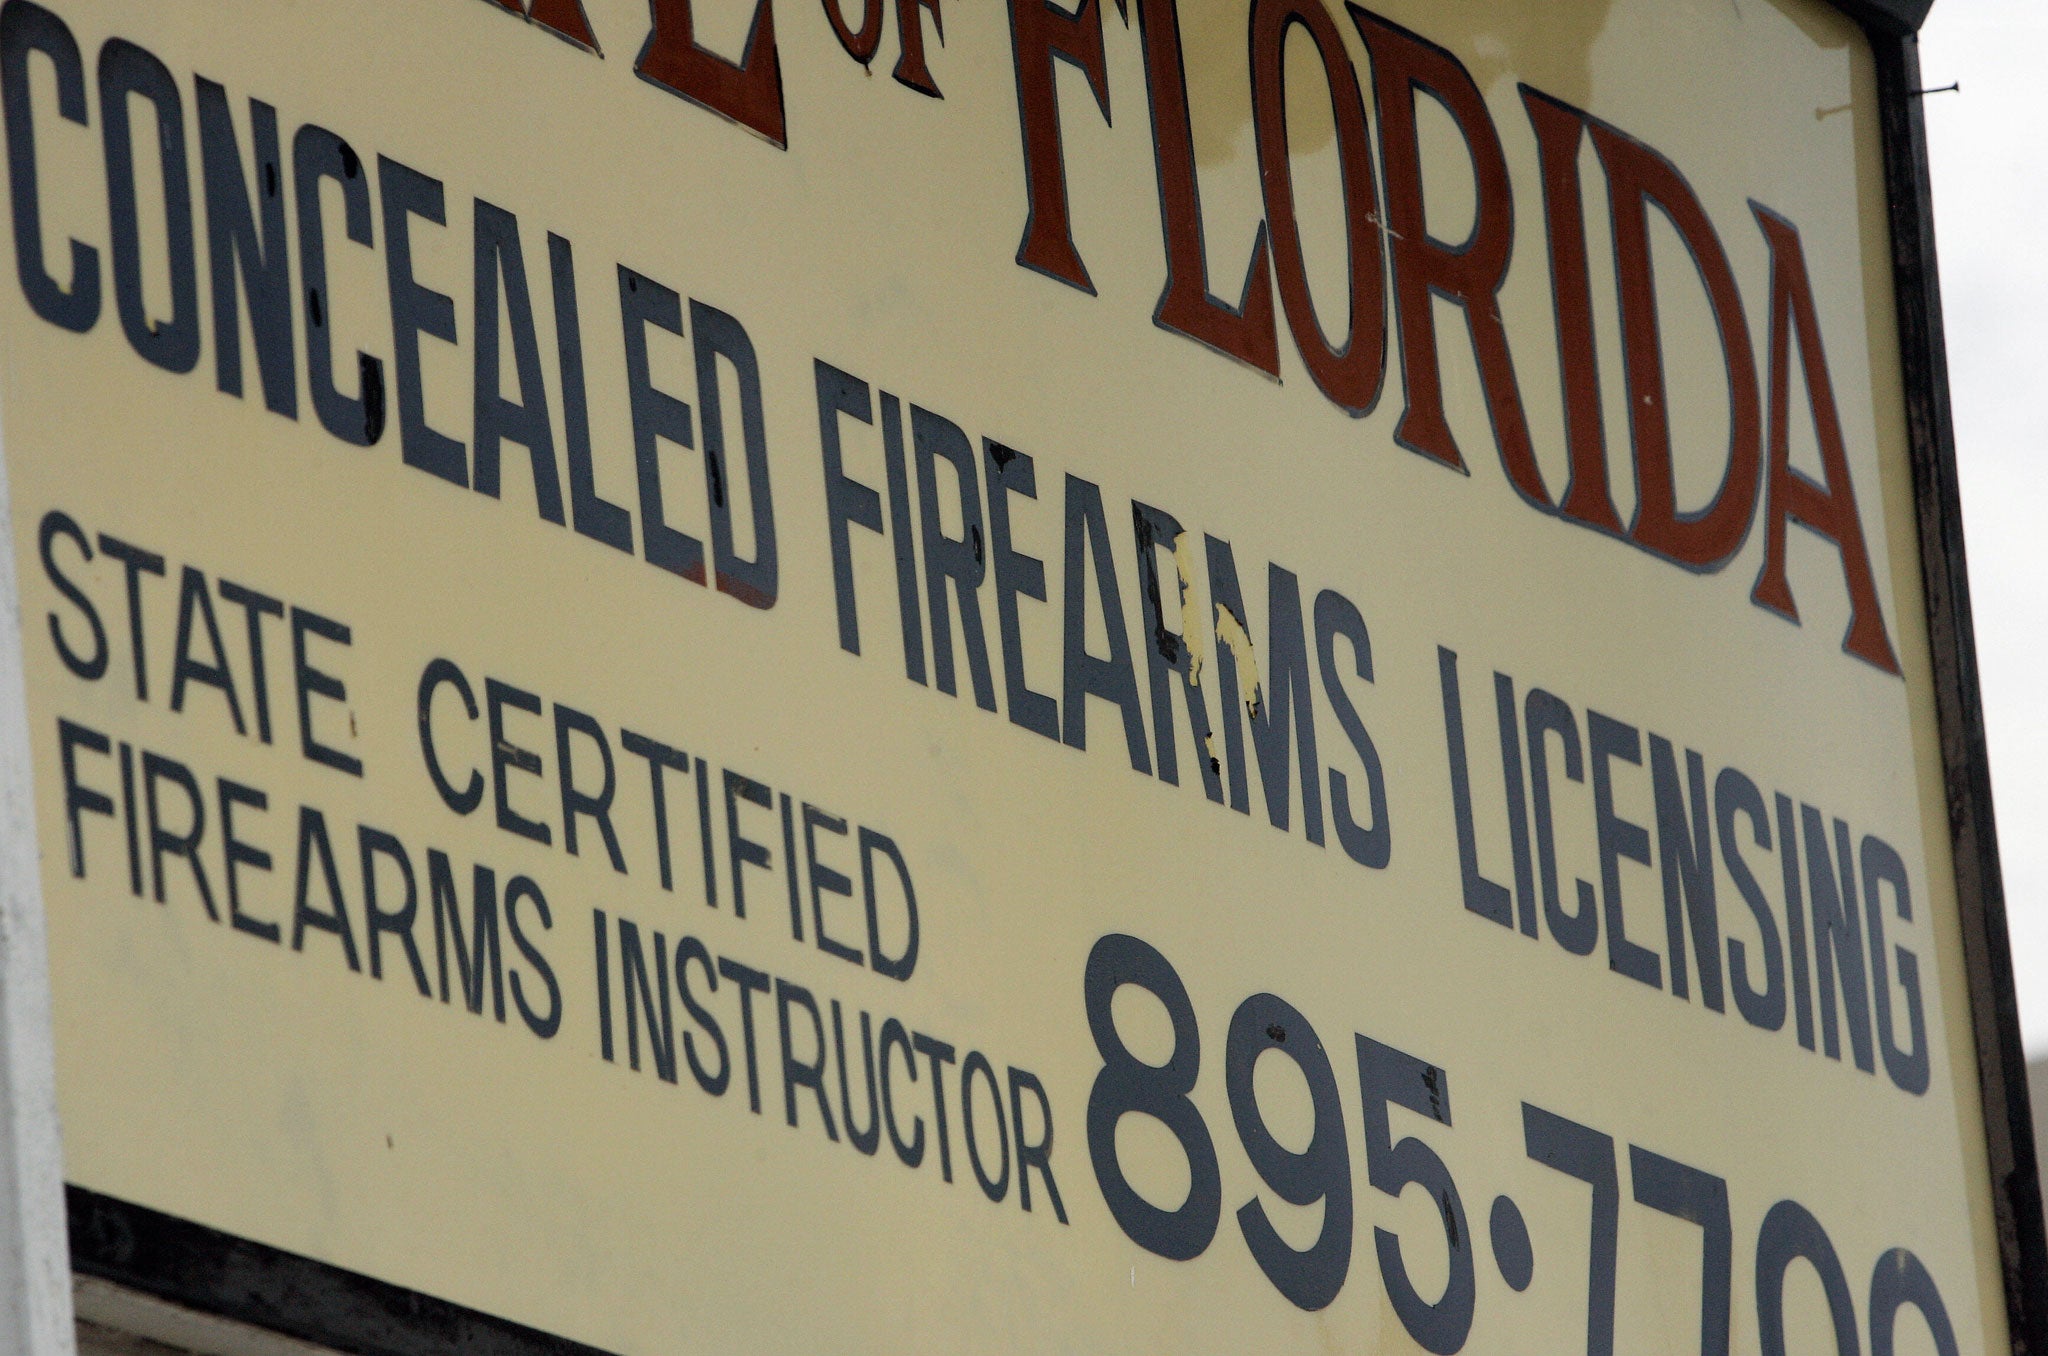 A gun shop offers concealed weapons training 18 April 2007 in Miami, Florida.